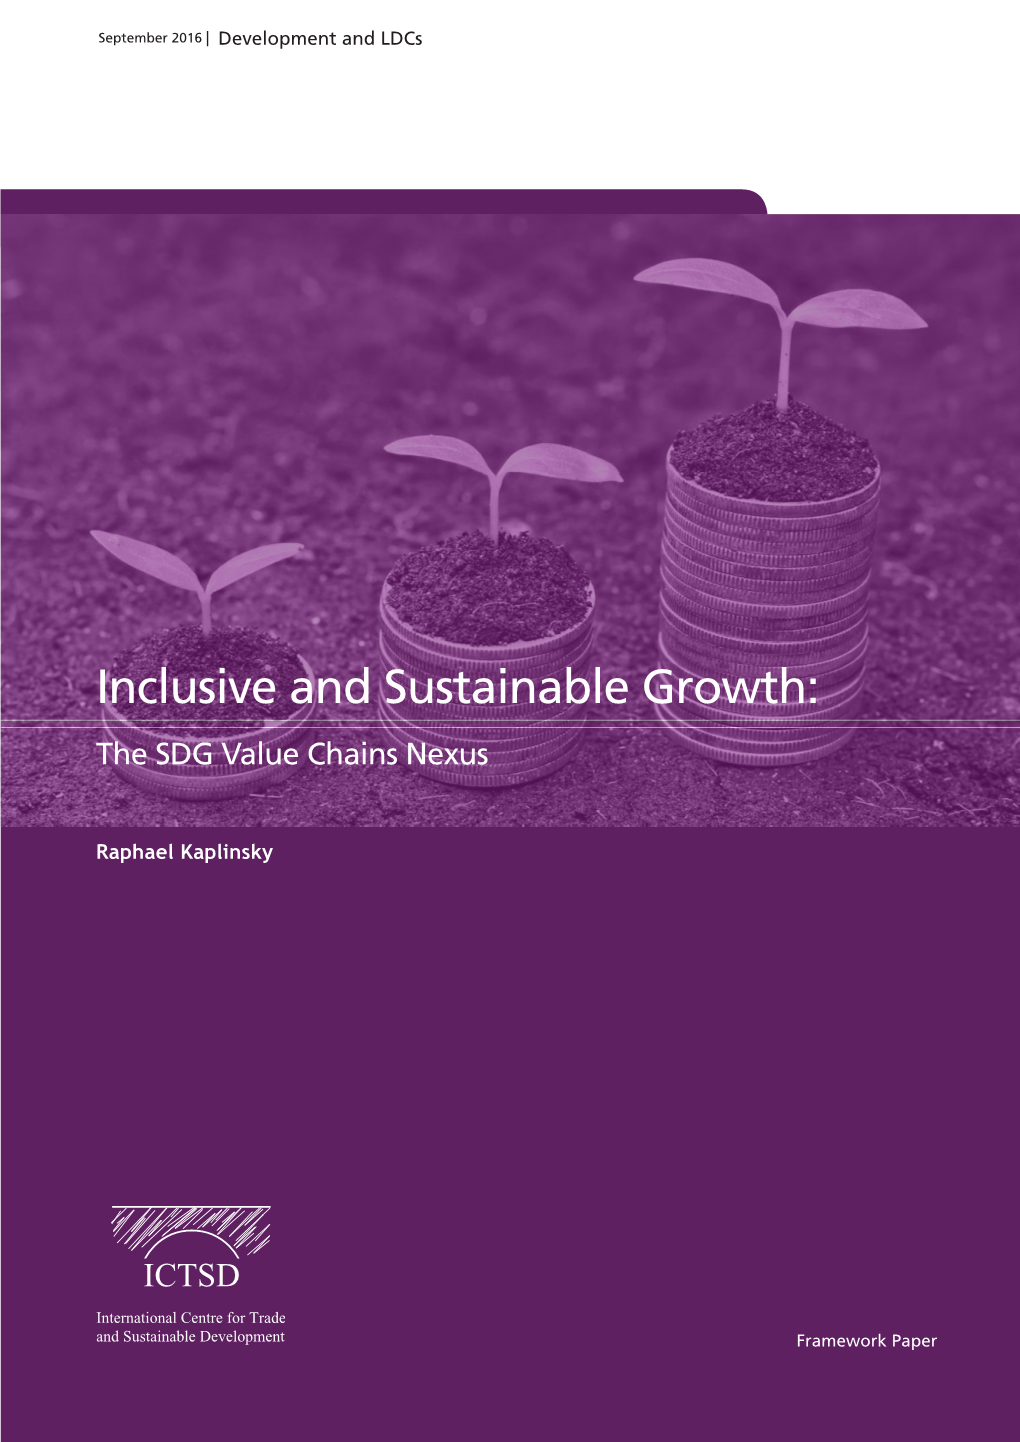 Inclusive and Sustainable Growth: the SDG Value Chains Nexus